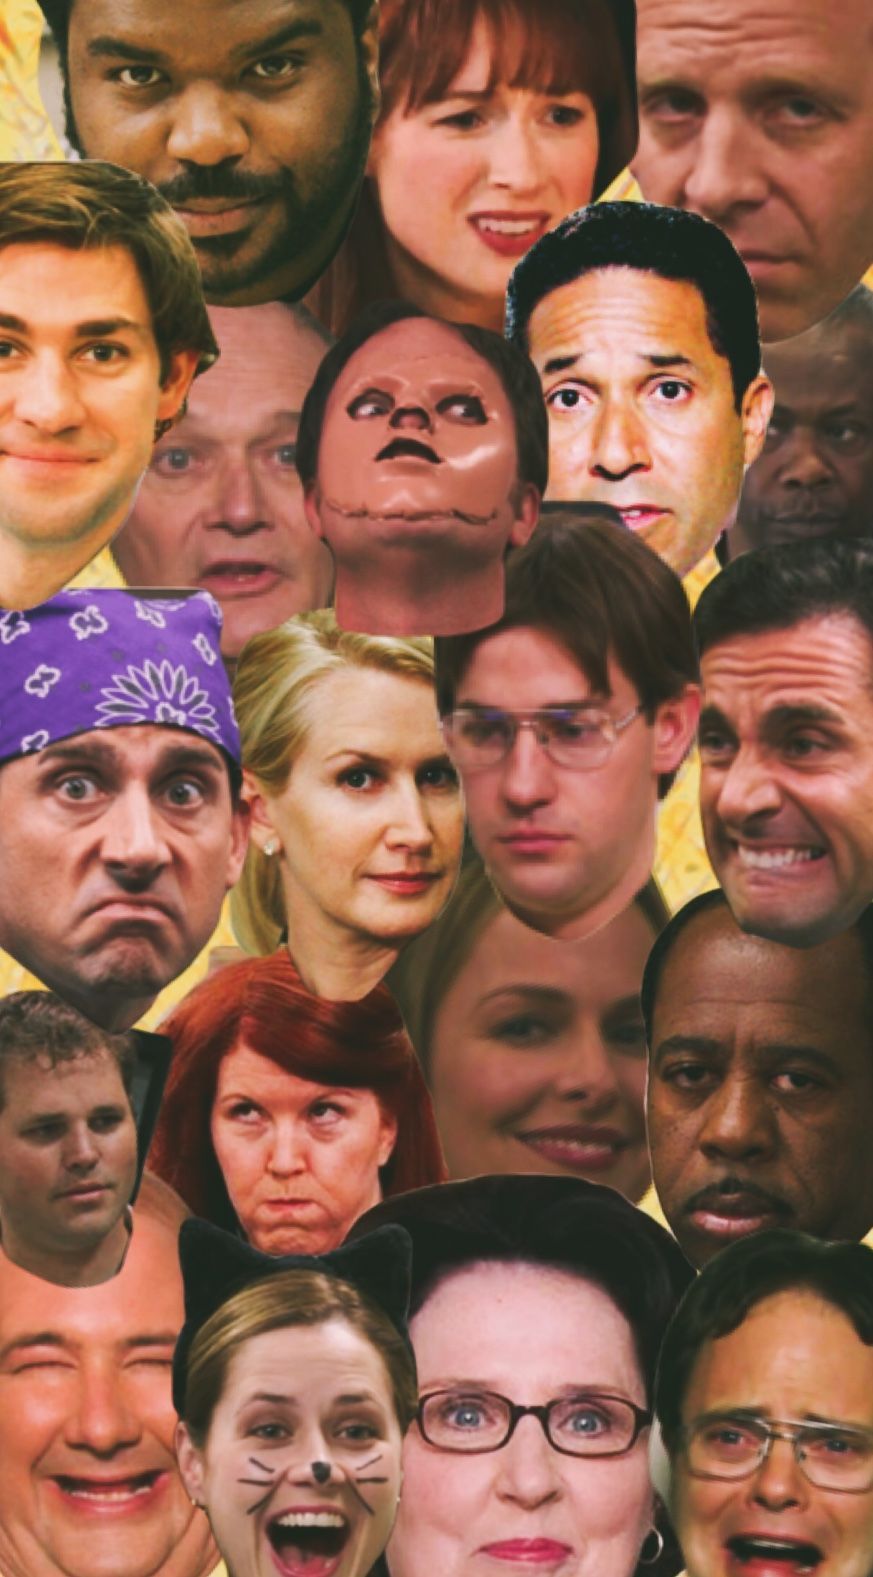 lock screen. Office wallpaper, Funny phone wallpaper, The office show